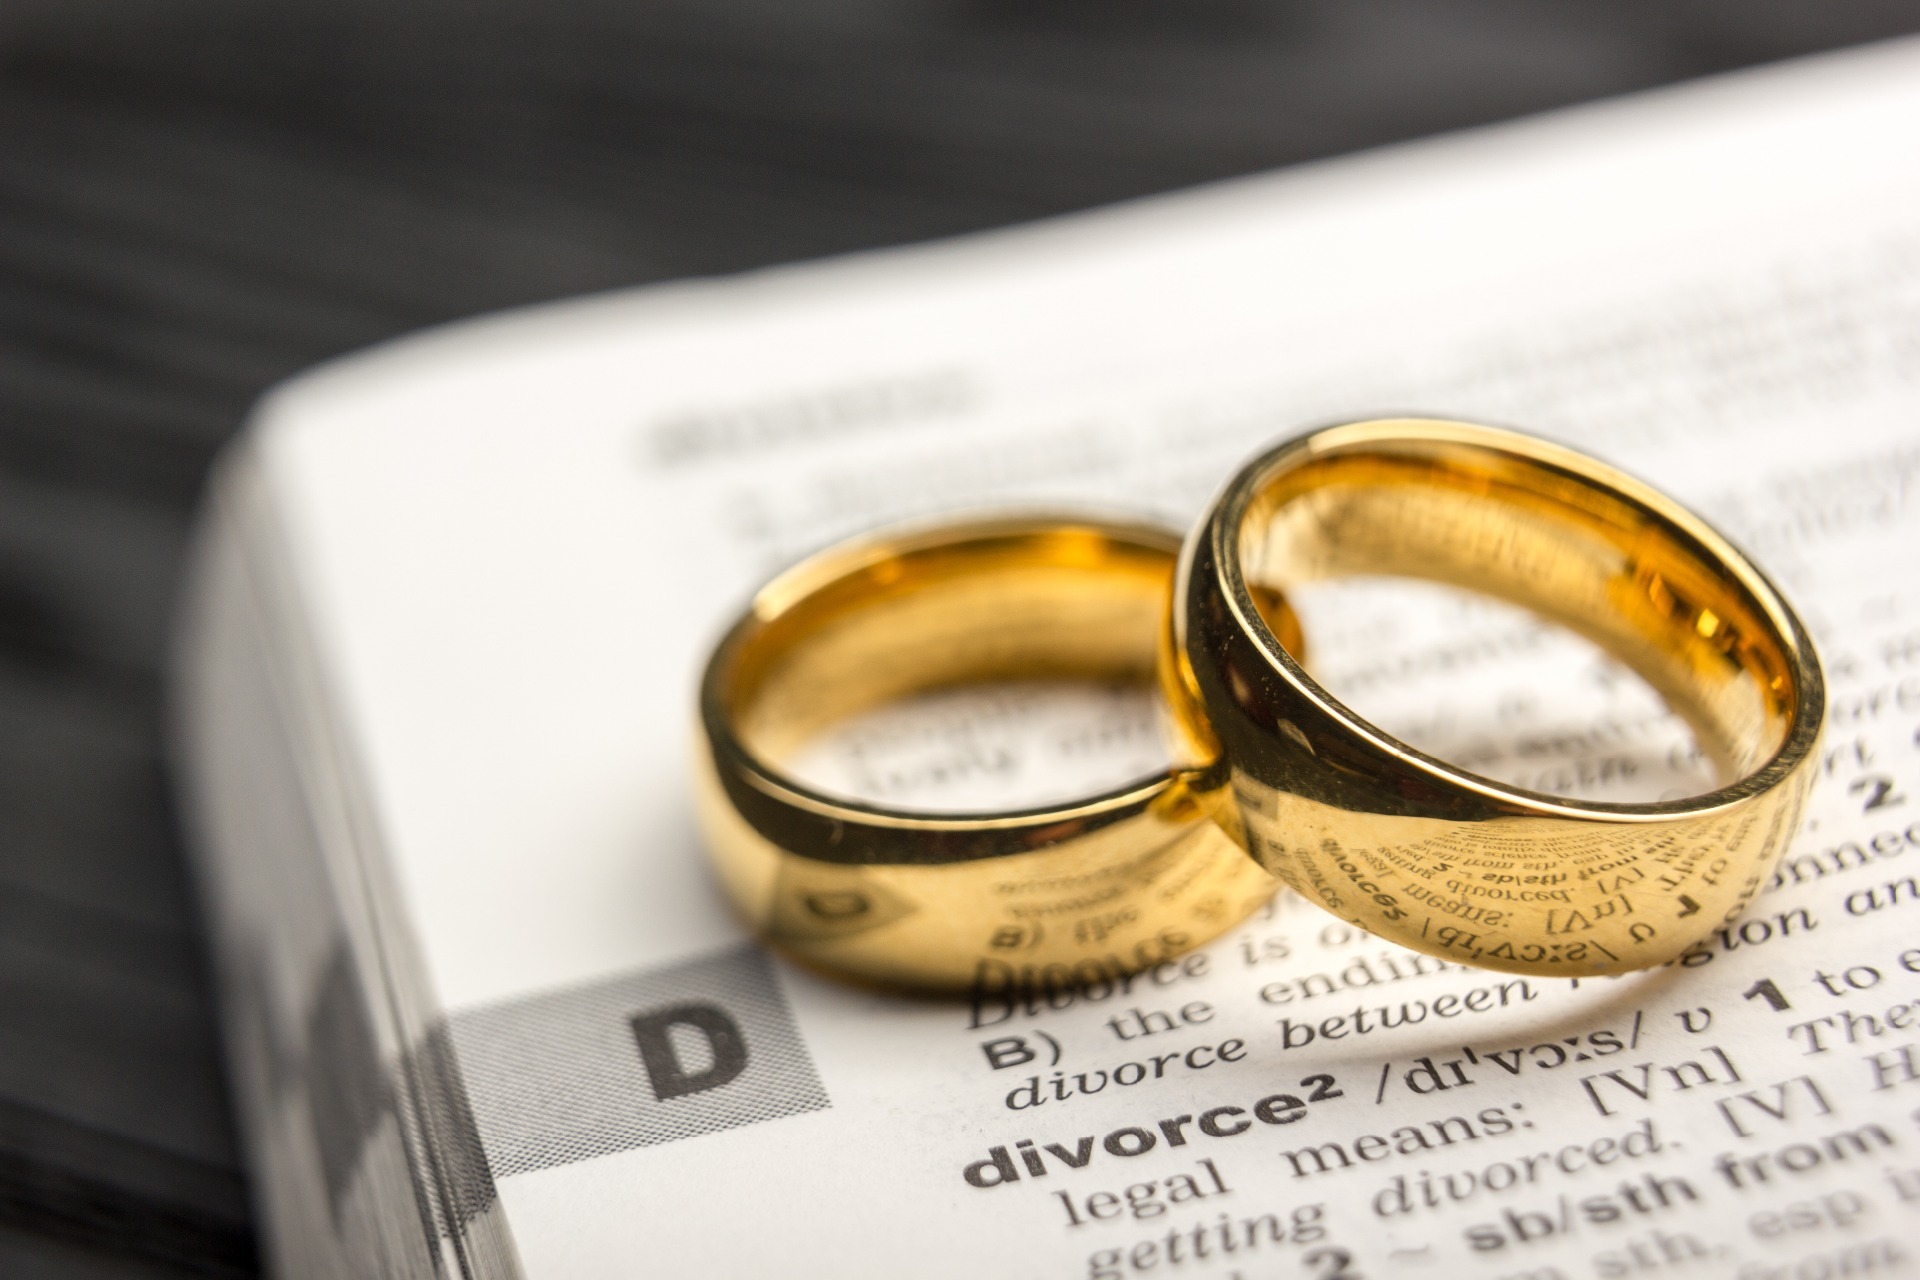 A pair of Gold Wedding bands resting on top of a dictionary showing the definition of divorce.